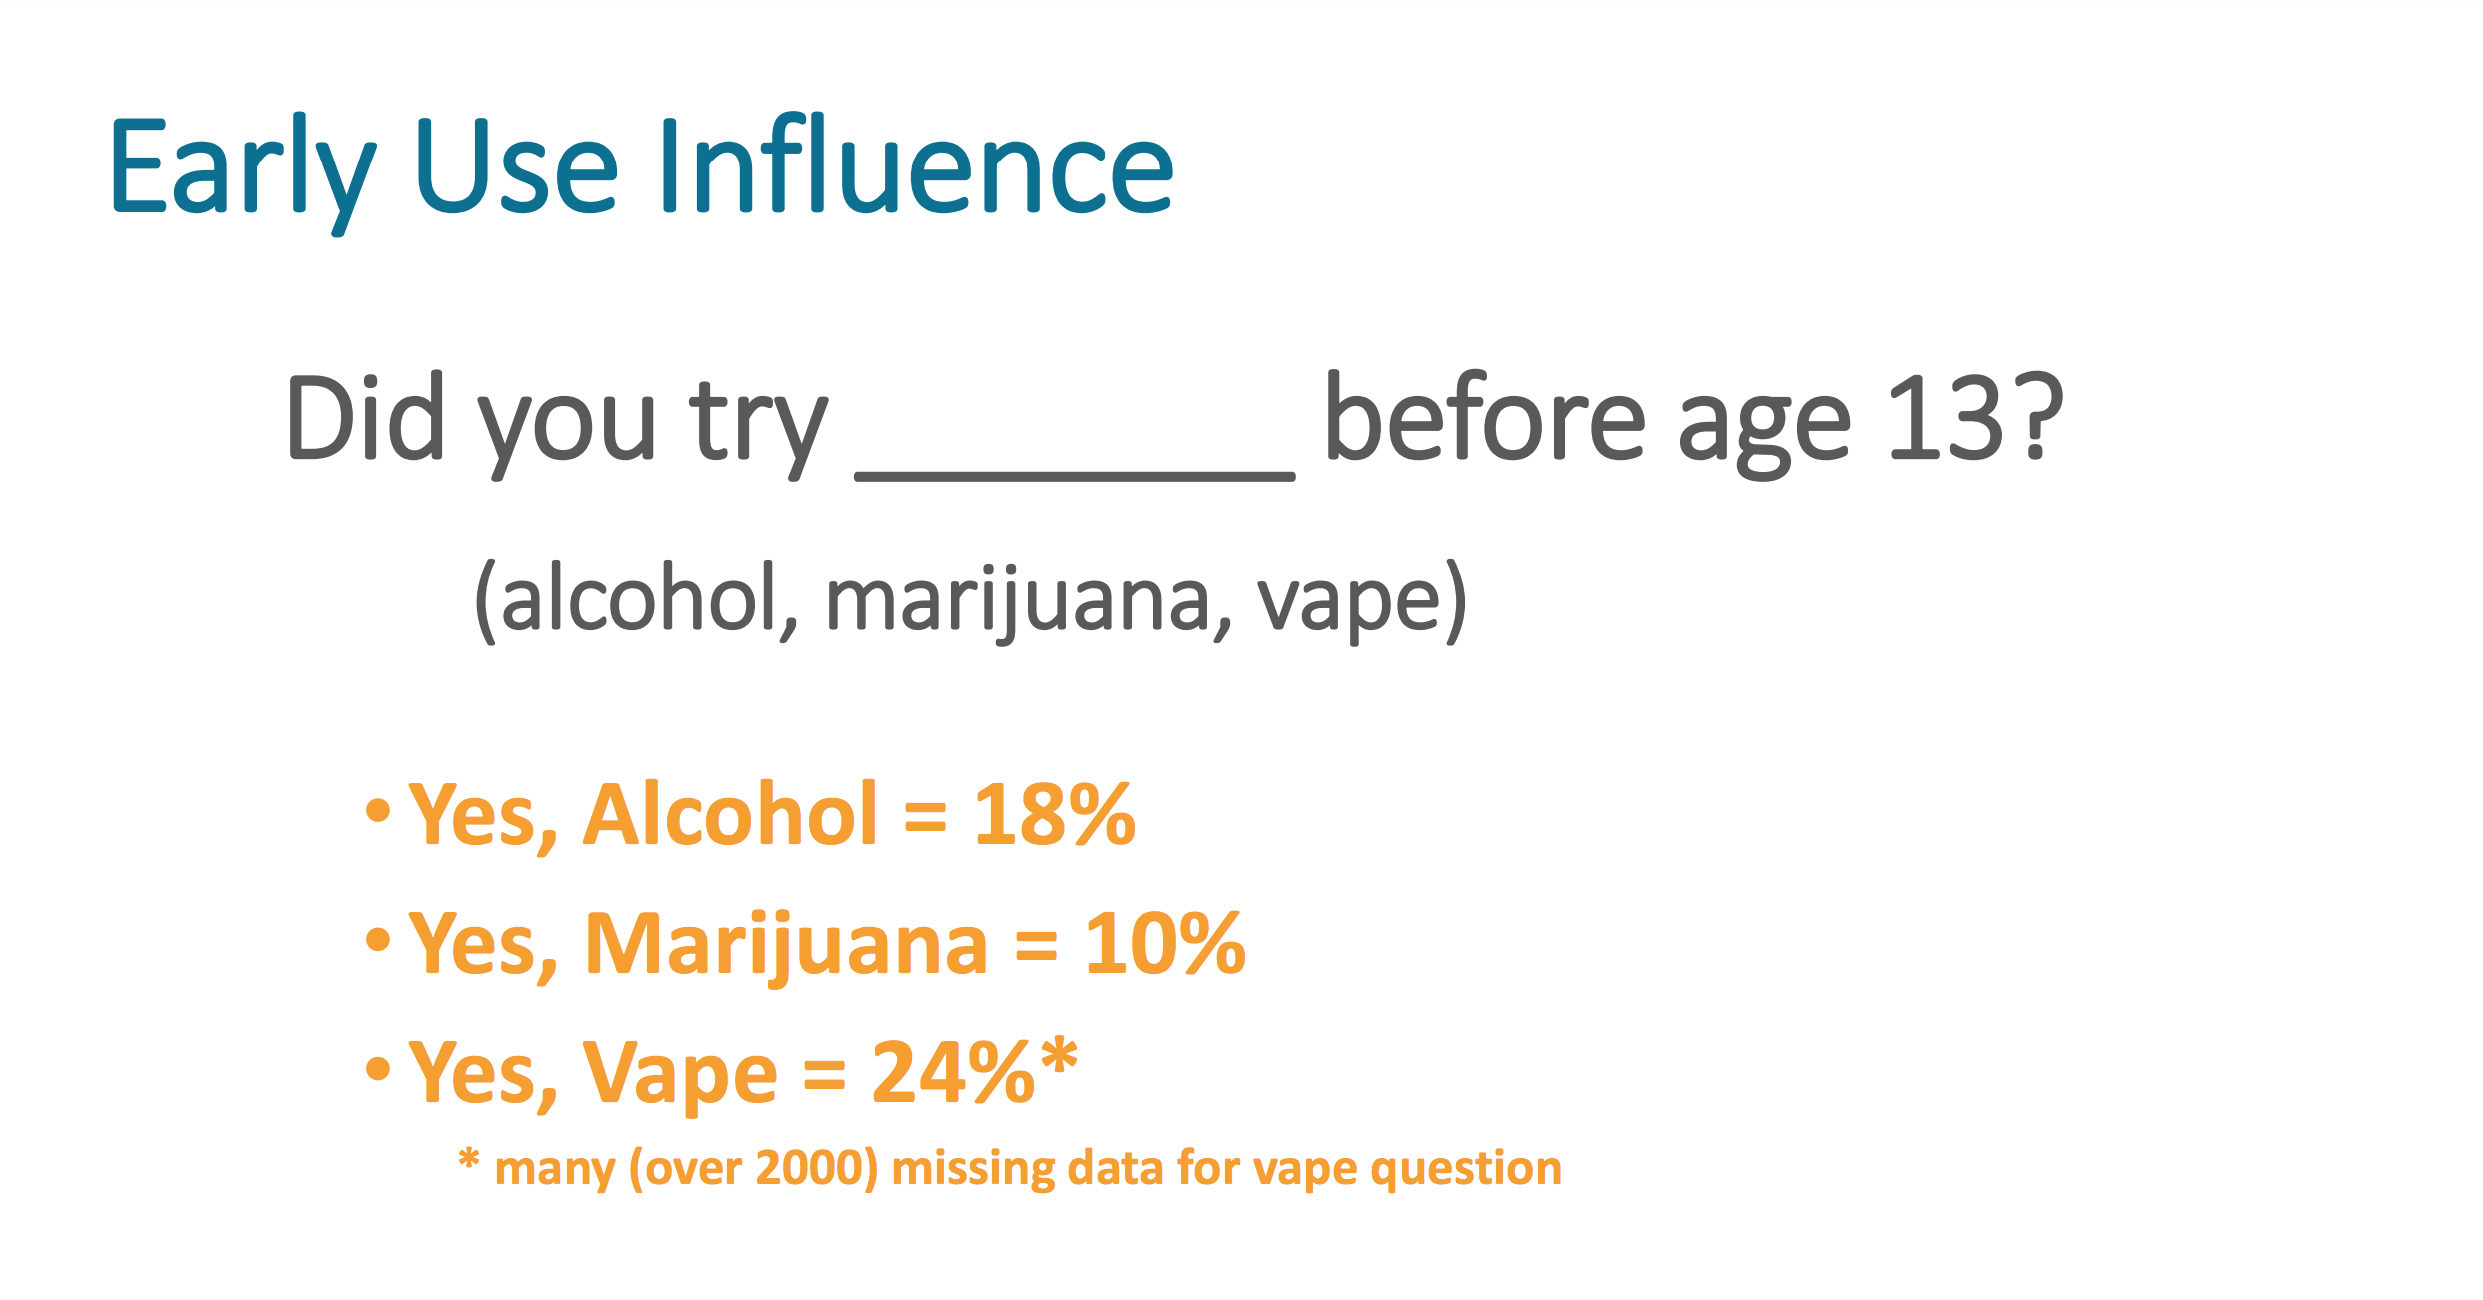 Results of HKCS question 'Did you try alcohol, marijuana, or vape before the age of 13?' 18% of youth responded they've tried alcohol. 10% tried marijuana and 24% tried vape. Many (over 2000) missing data for vape.